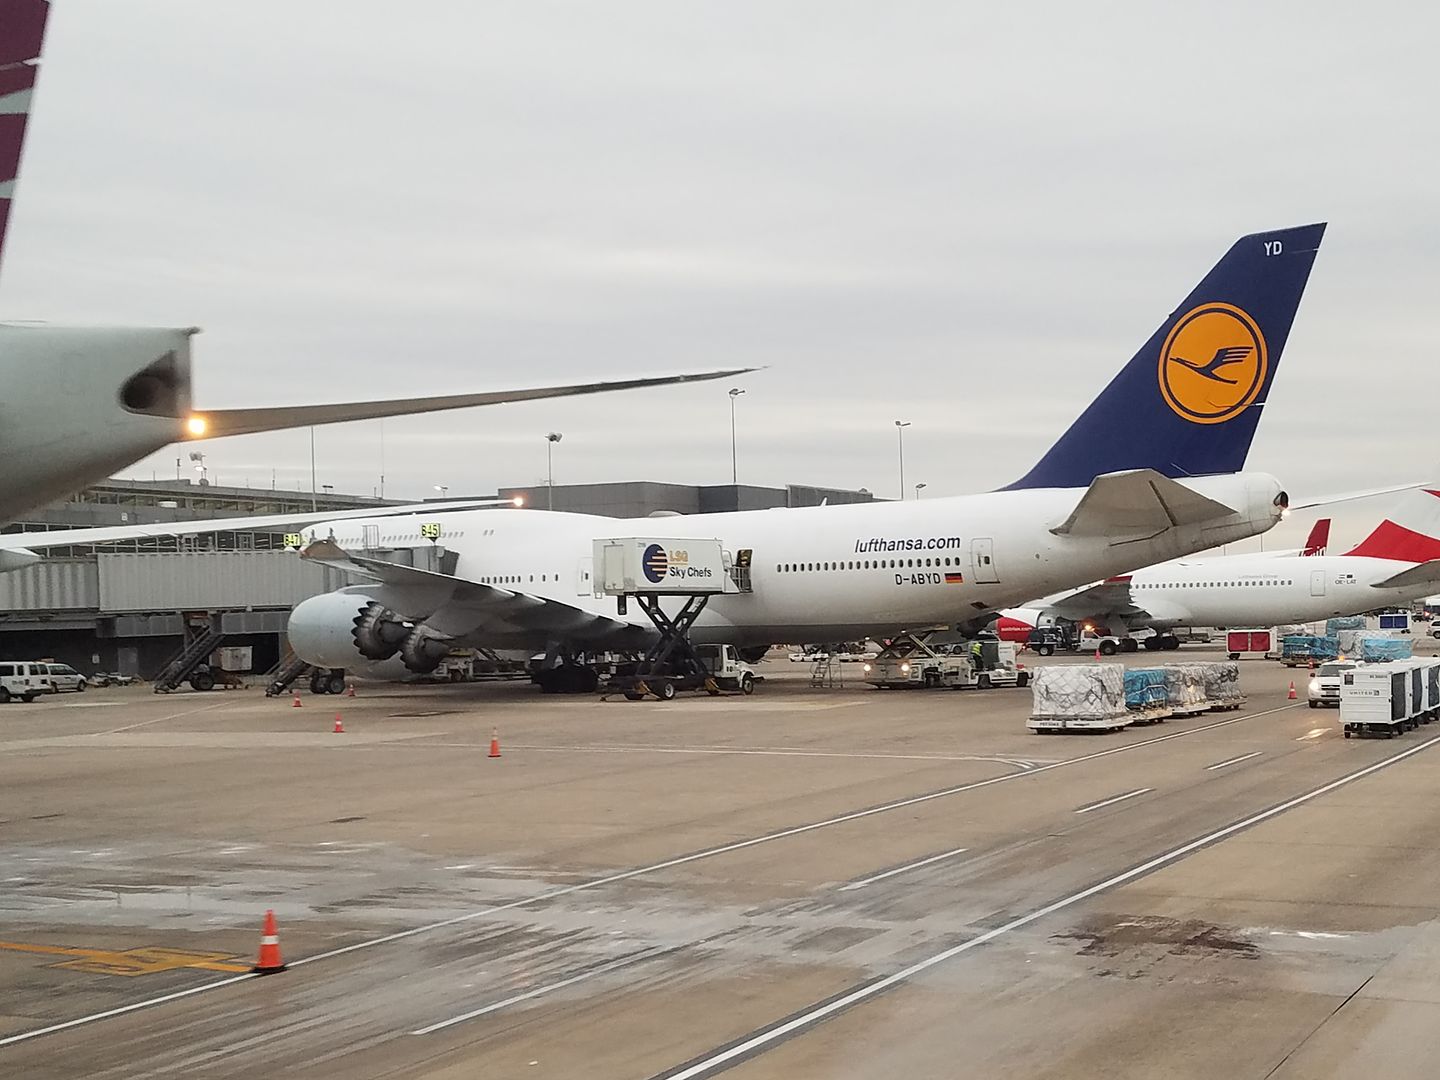 Six Boeing 747s Flew To The Netherlands For Storage And Weren't